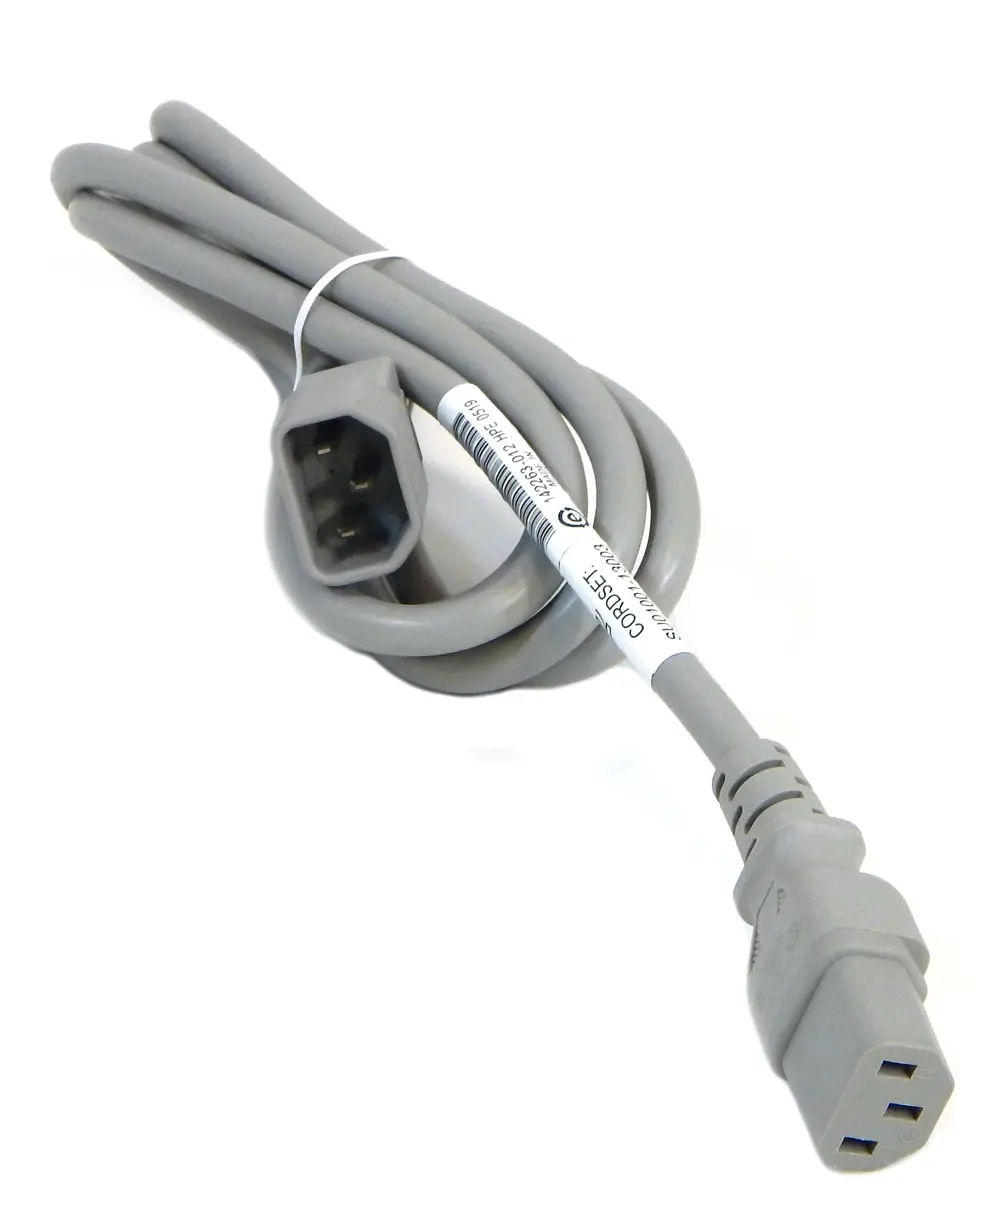 hewlett packard hp iec-to-iec cable - What does IEC stand for IEC cable